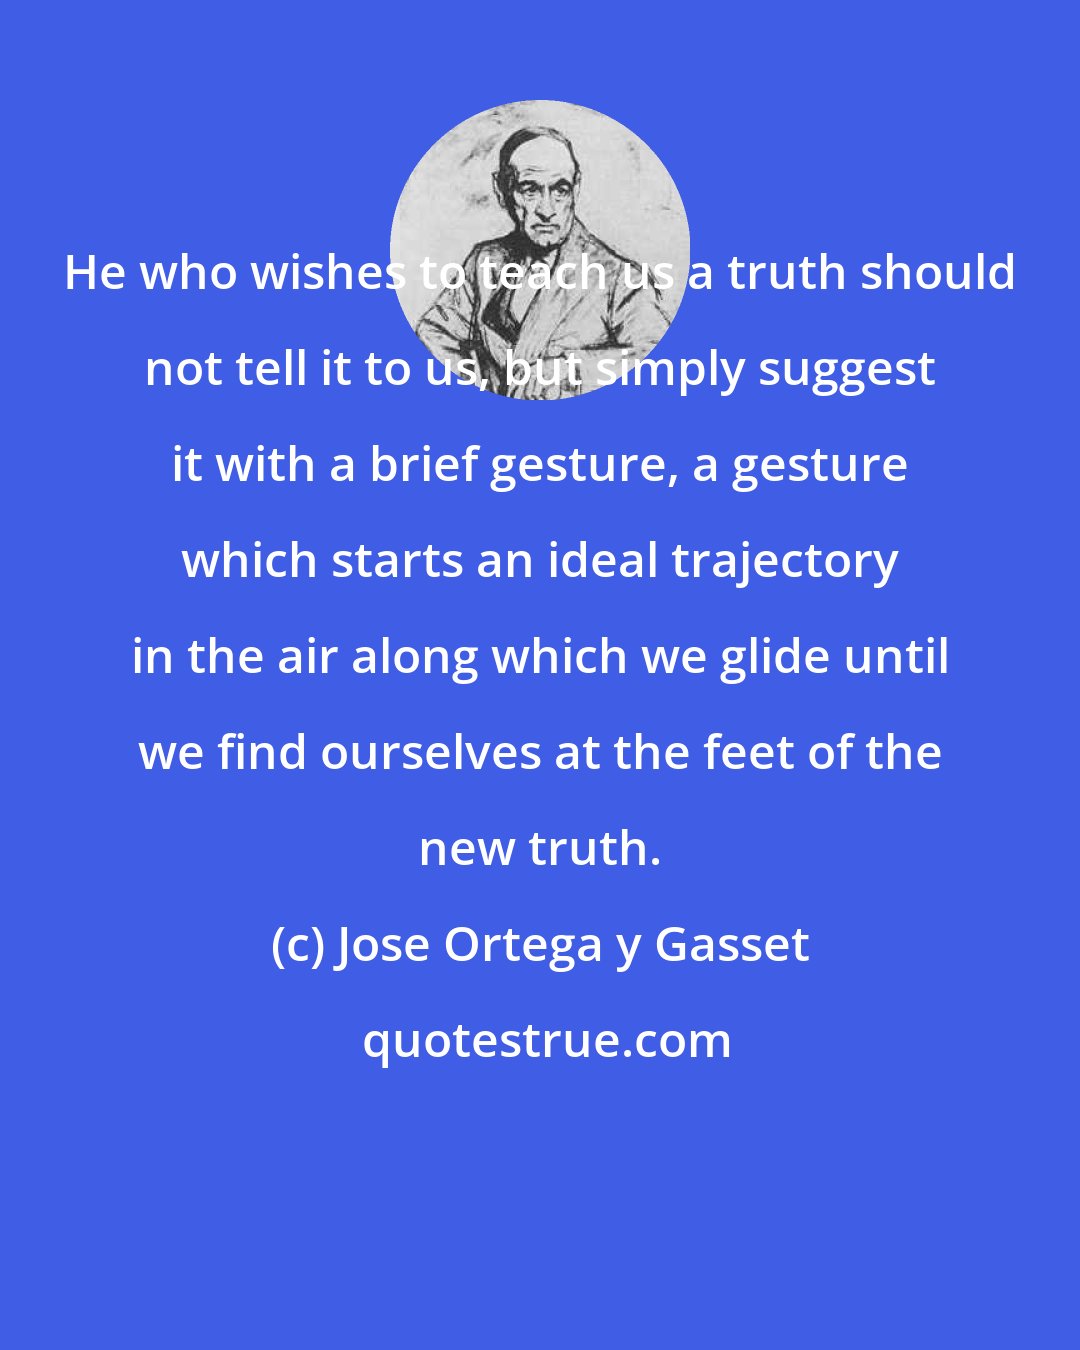 Jose Ortega y Gasset: He who wishes to teach us a truth should not tell it to us, but simply suggest it with a brief gesture, a gesture which starts an ideal trajectory in the air along which we glide until we find ourselves at the feet of the new truth.